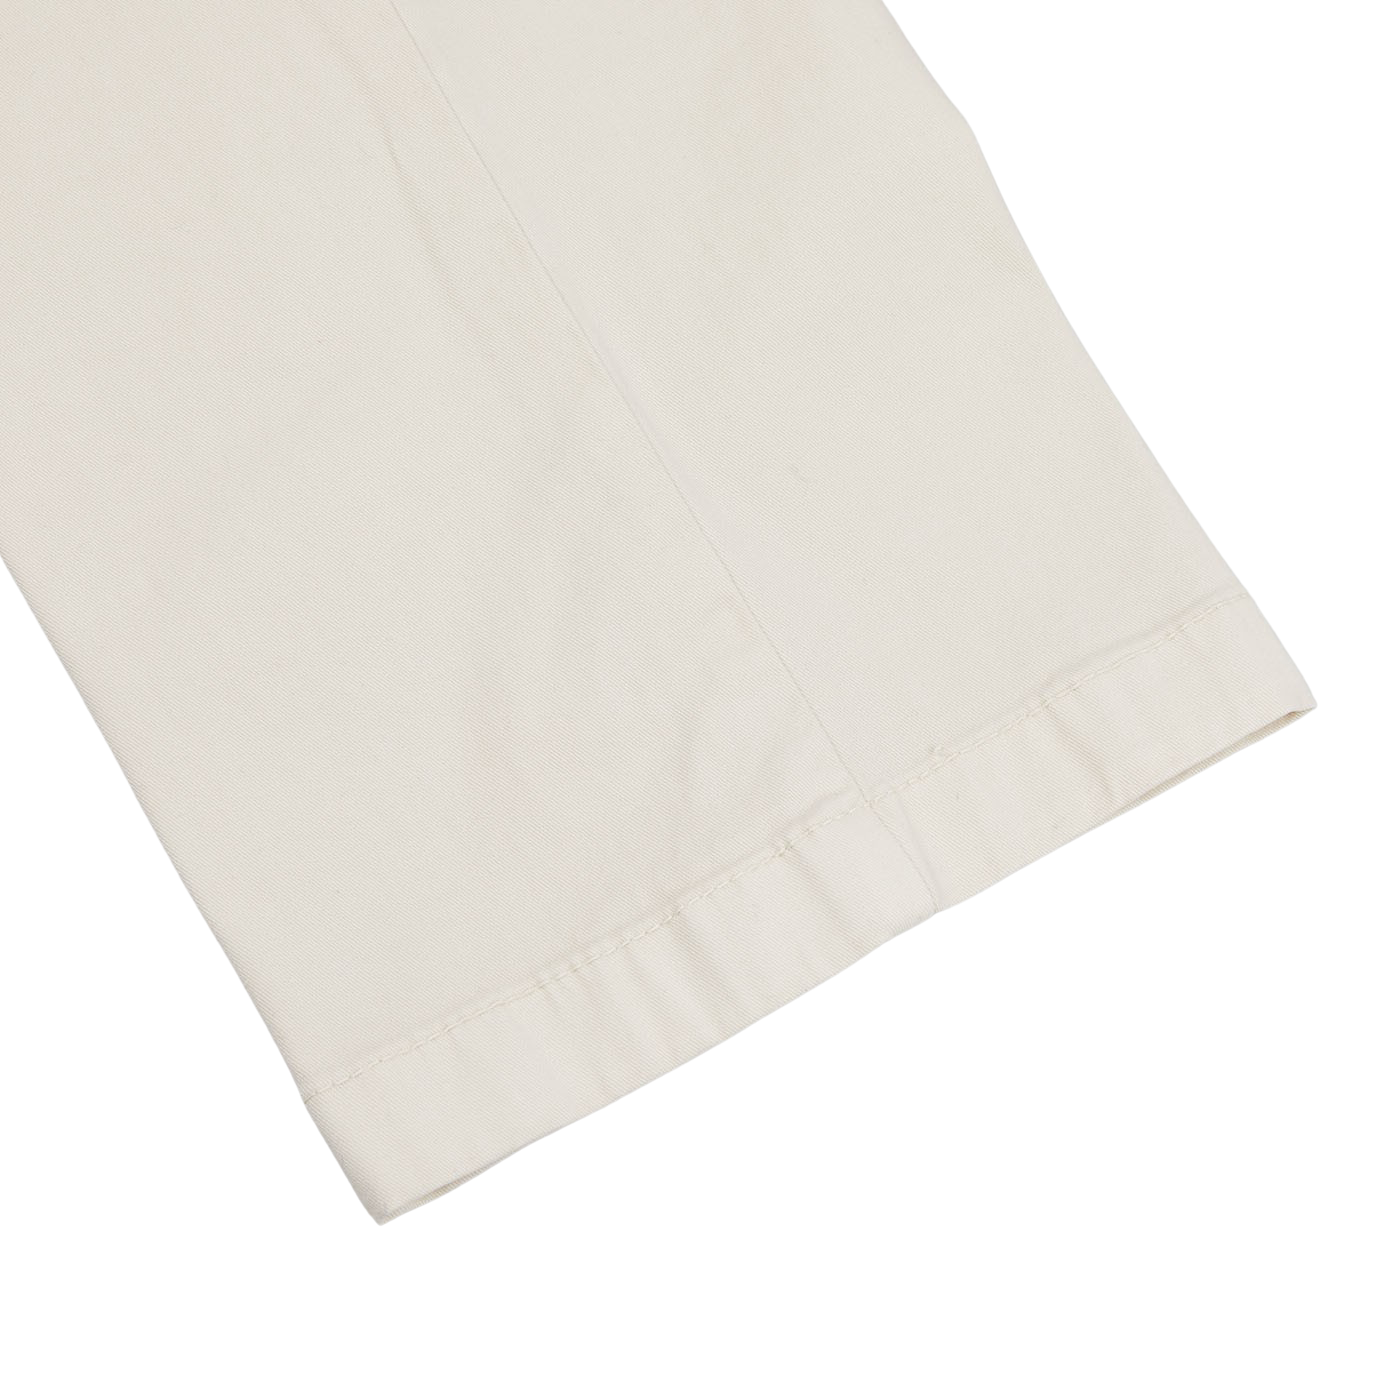 A close up of Light Beige Cotton Stretch Chinos by Berwich on a white surface.